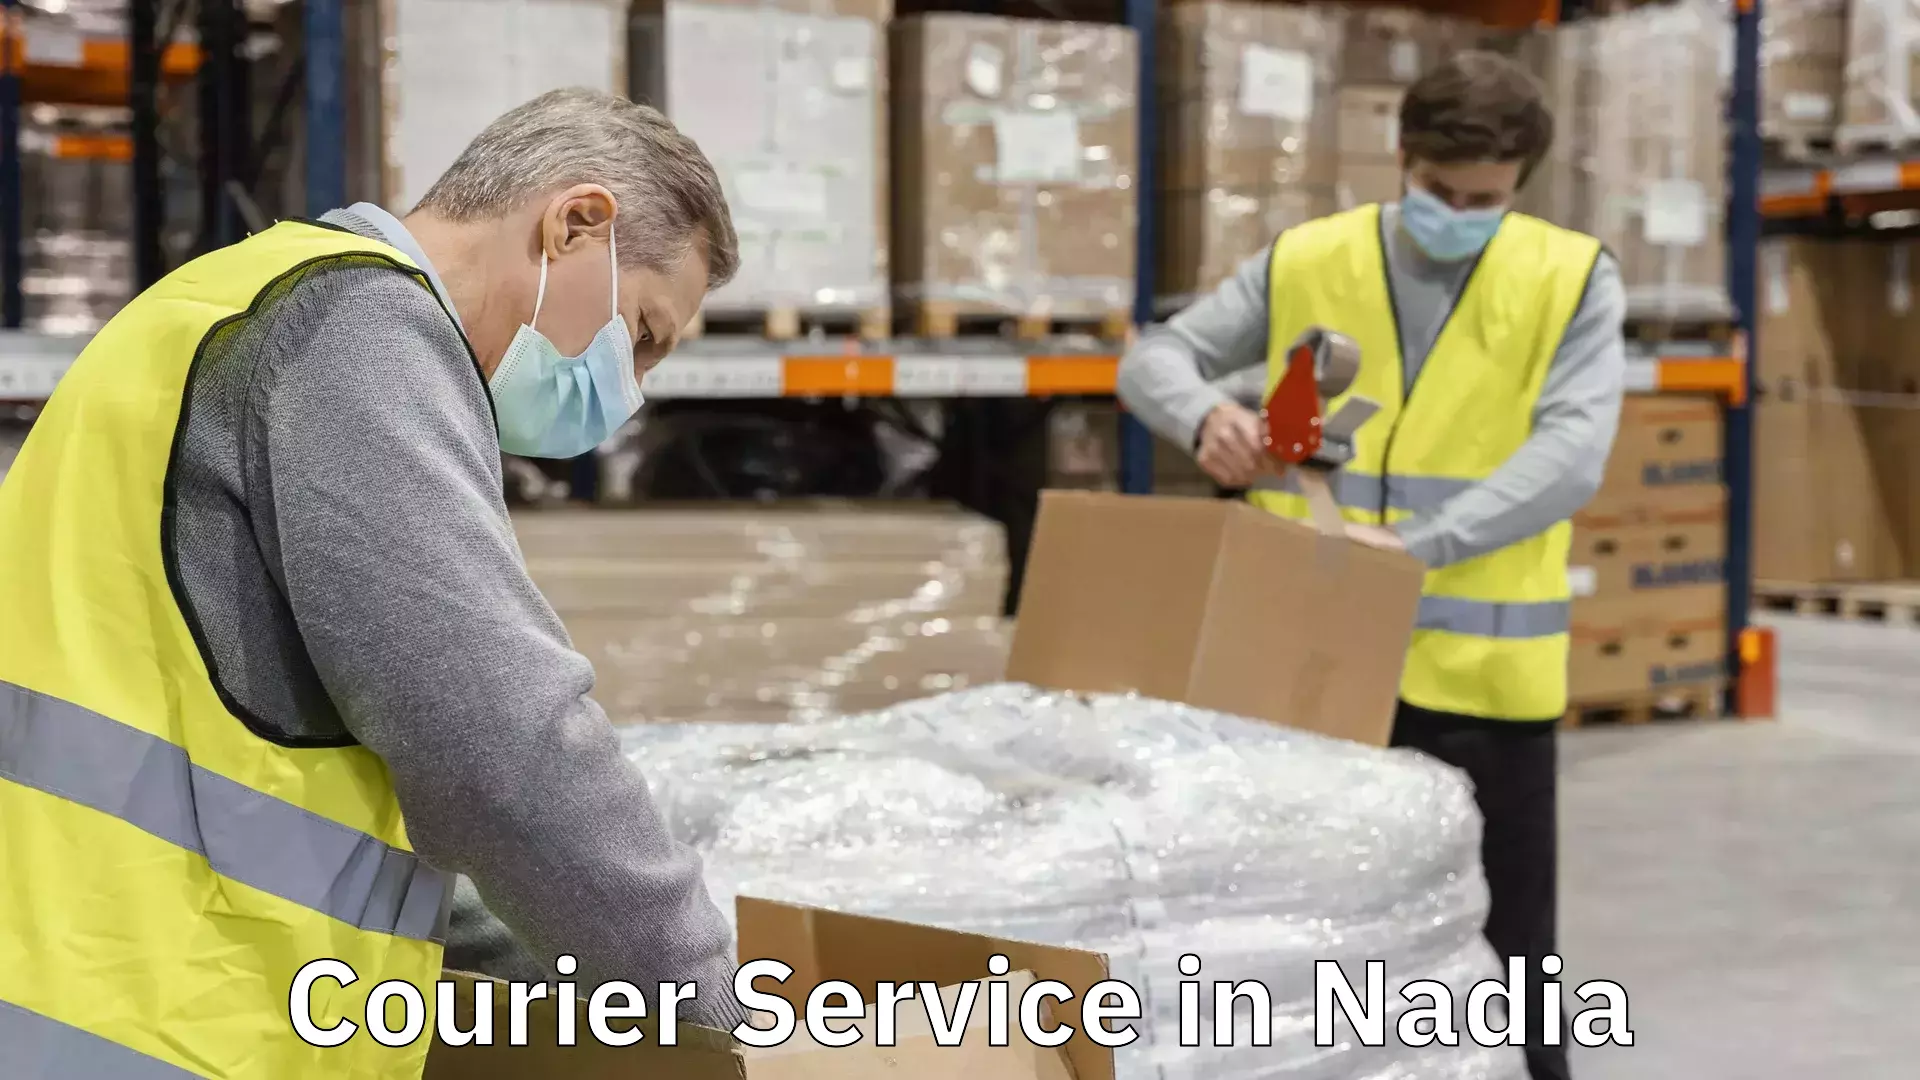 Parcel handling and care in Nadia